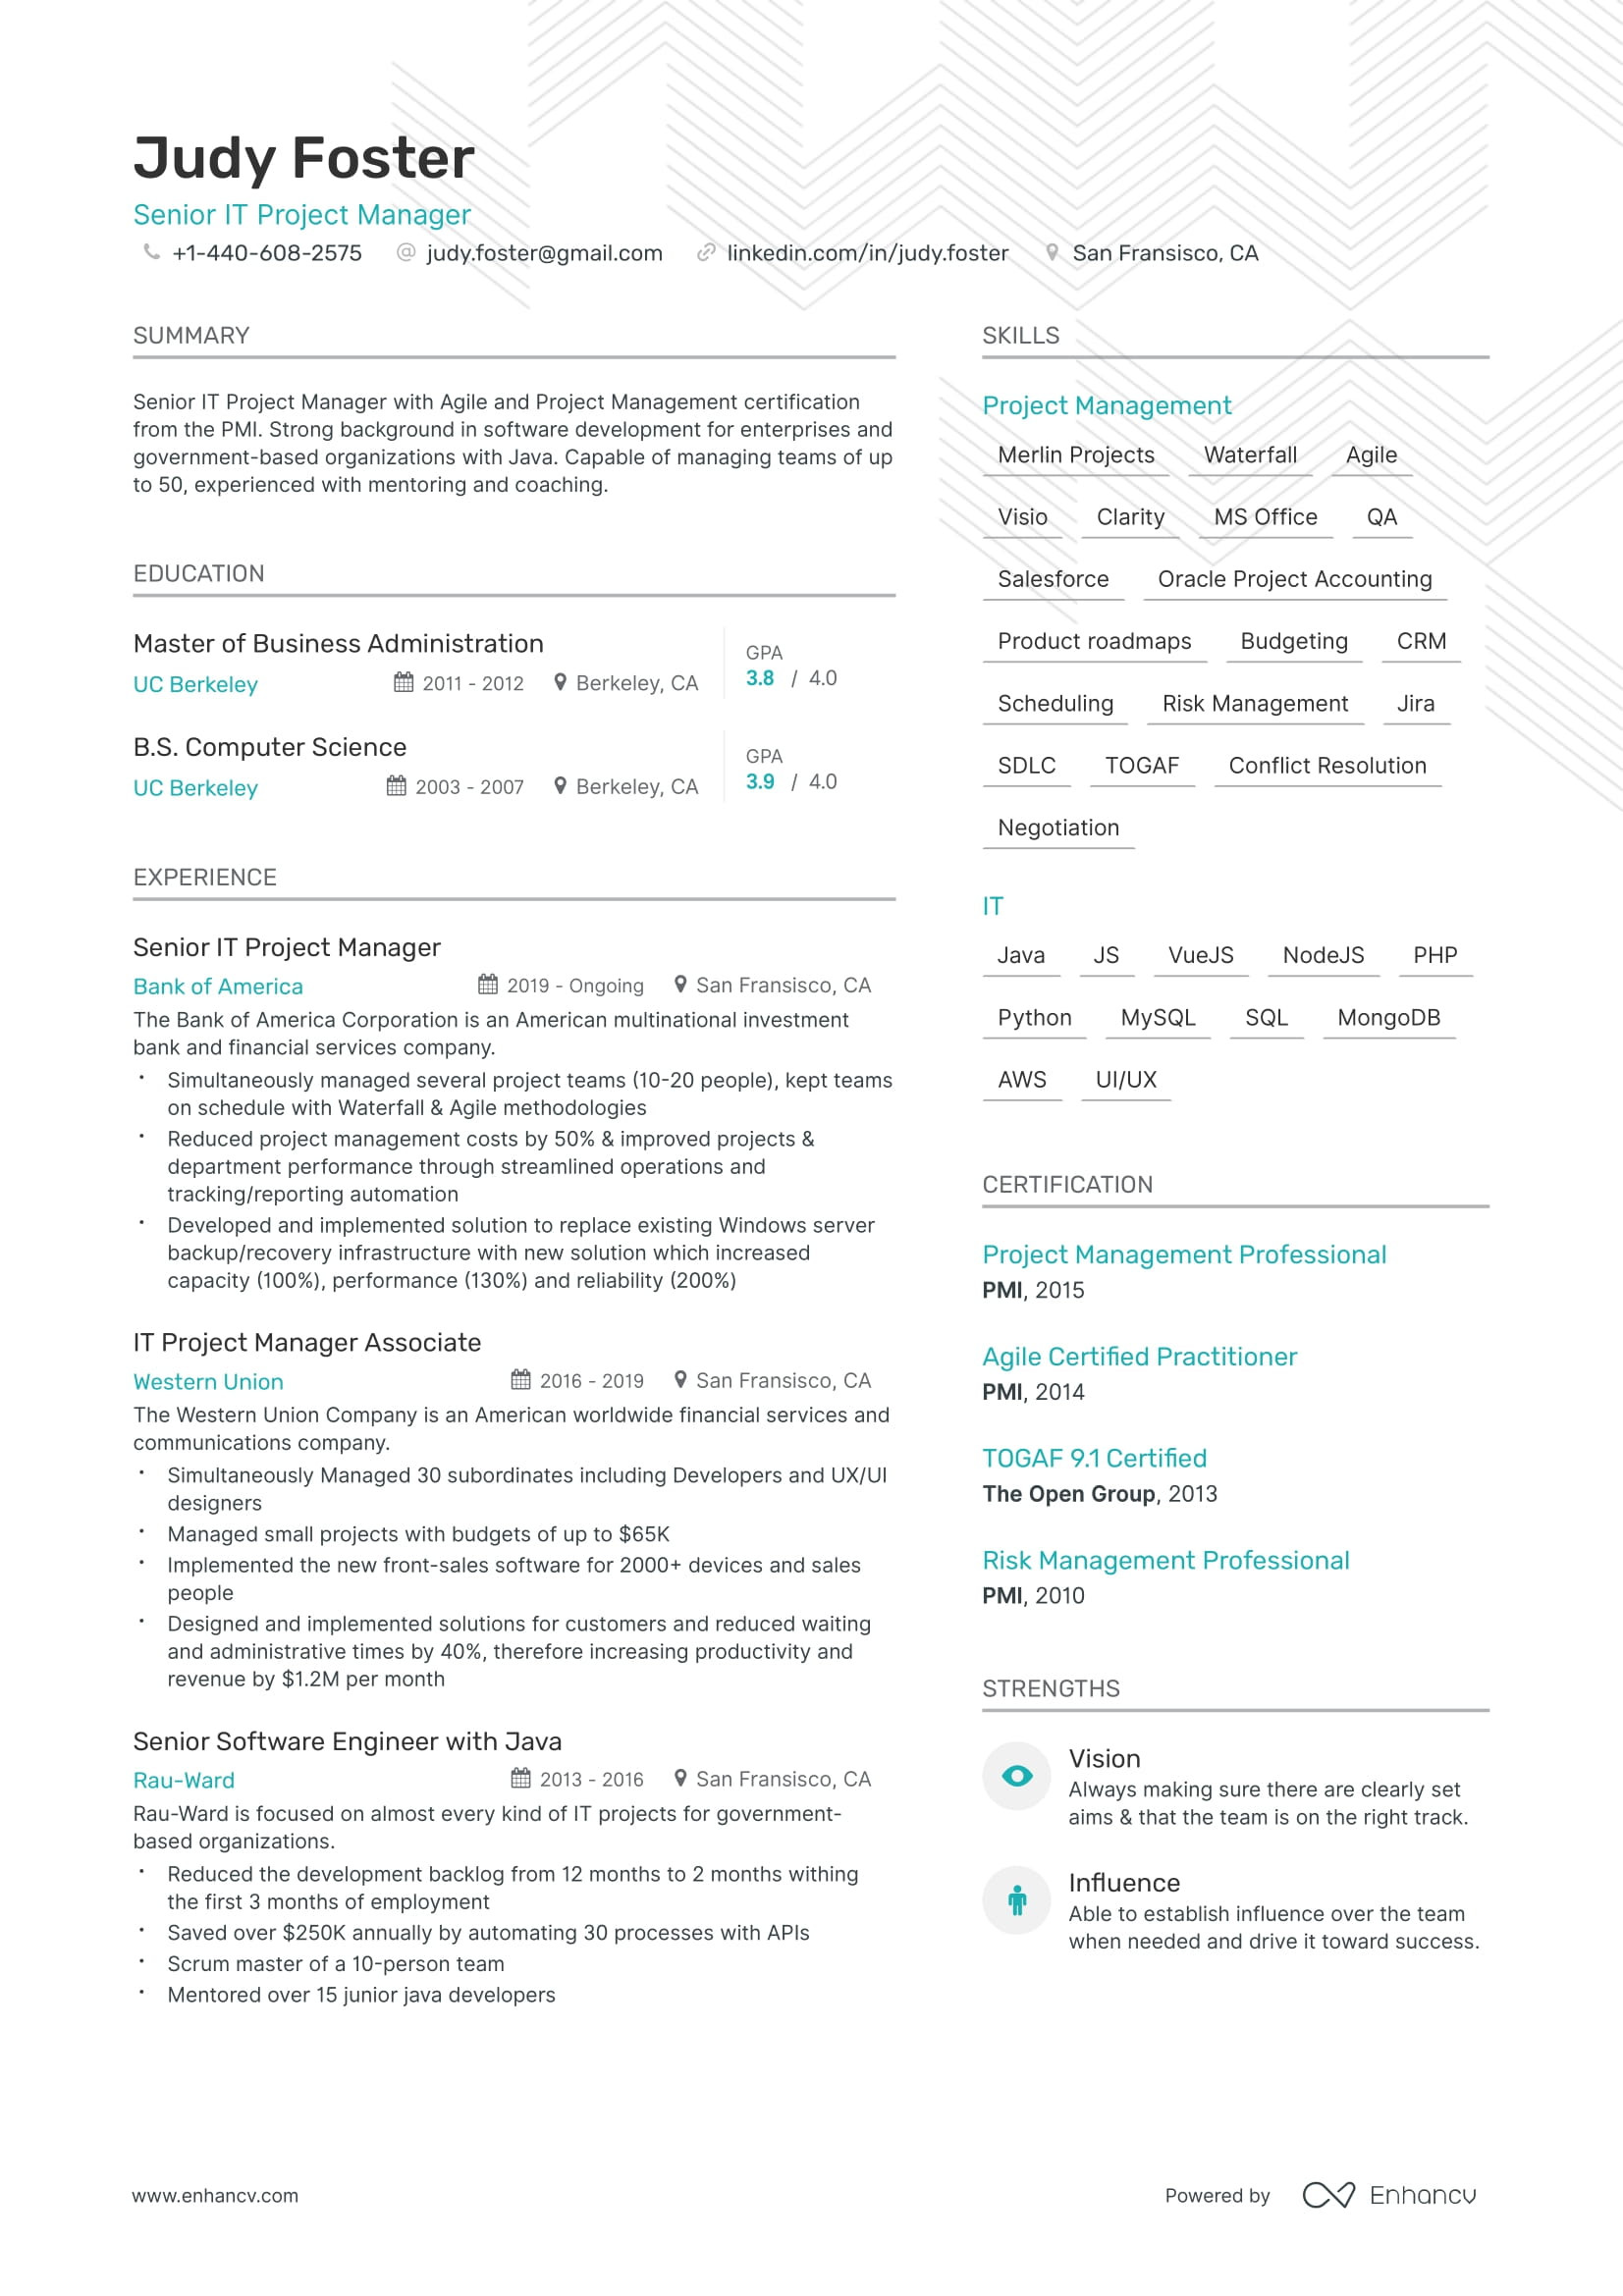 Development Engineer with Npd Resume Samples It Project Manager Resume Examples & top Advice (layout, Skills …